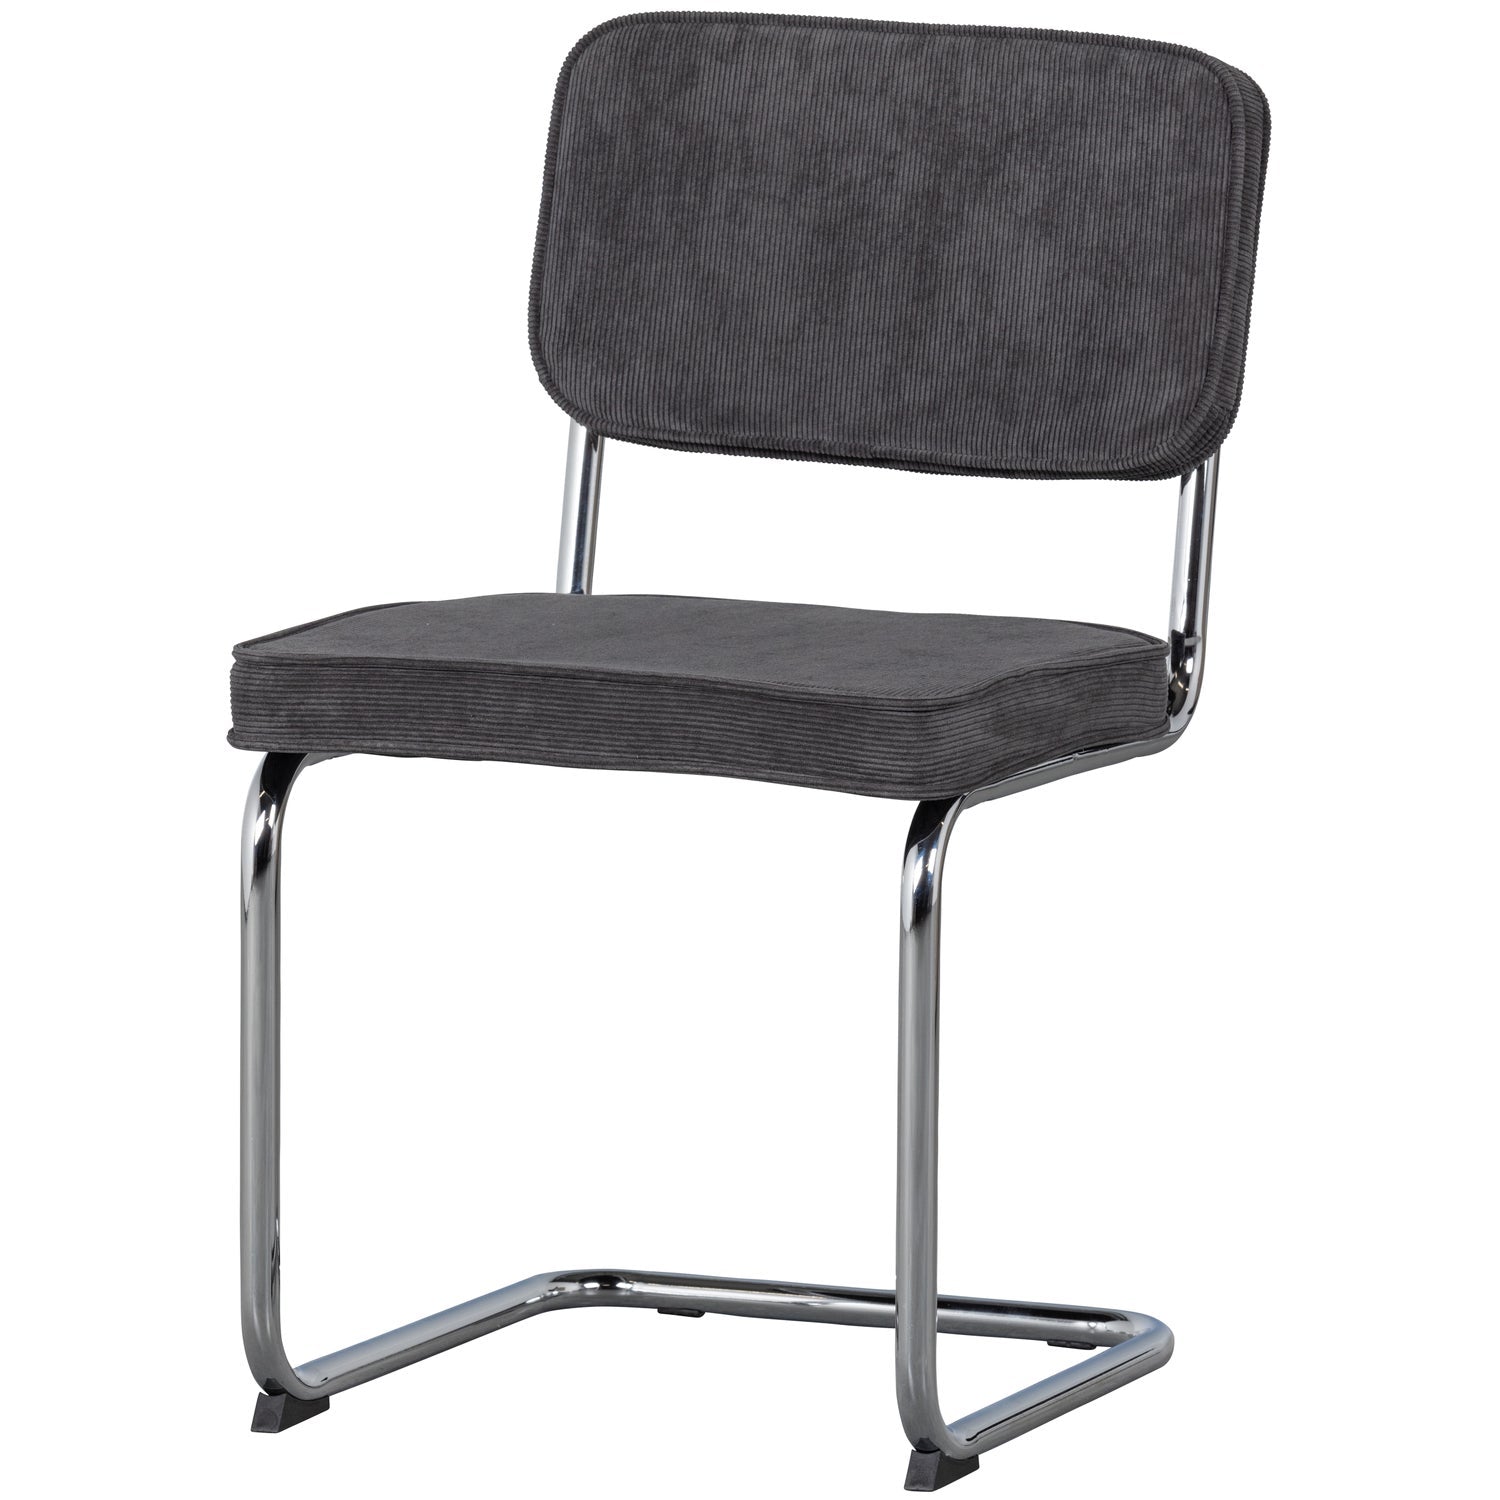 CORDUROY TUBE FRAME CHAIR RIBCORD ANTHRACITE